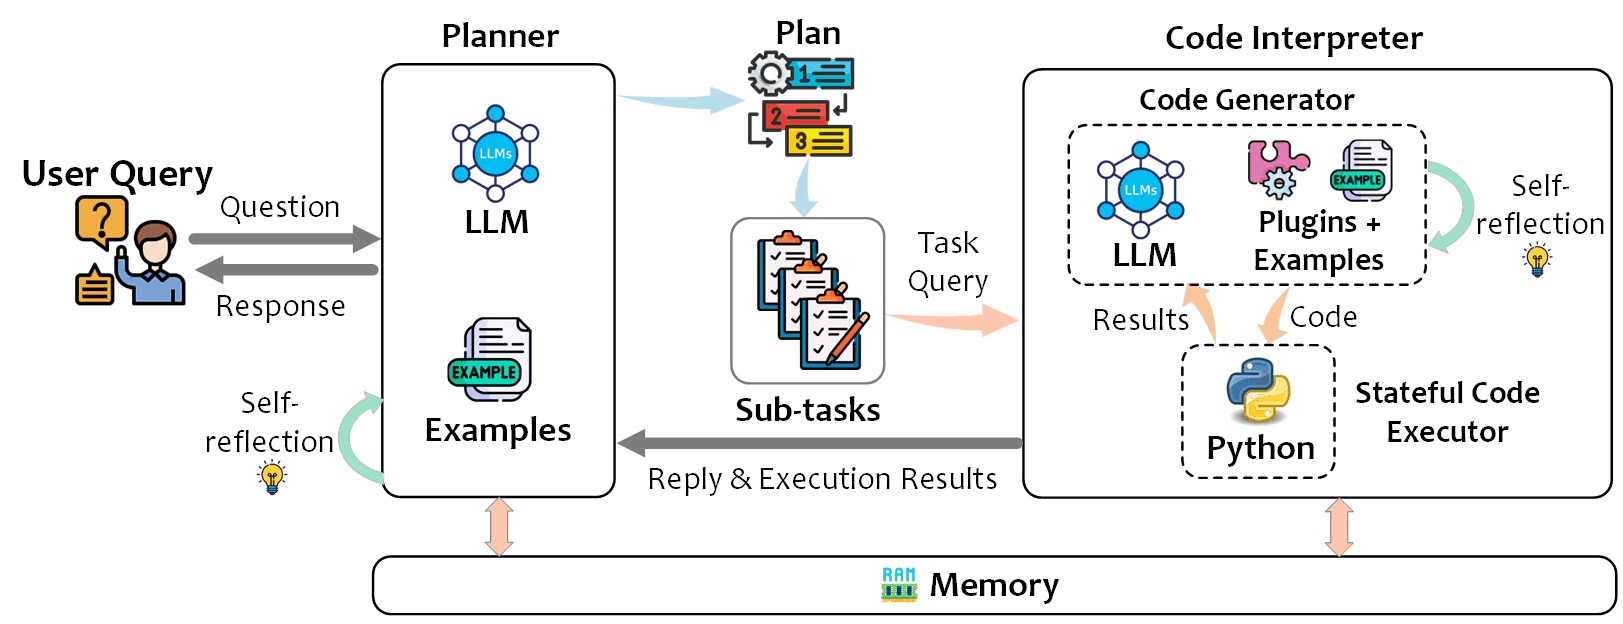 Figure 2. The architecture of taskweaver, which consists of three parts, planner, code generator and stateful code executor. They communicate with each other to accomplish user’s request.